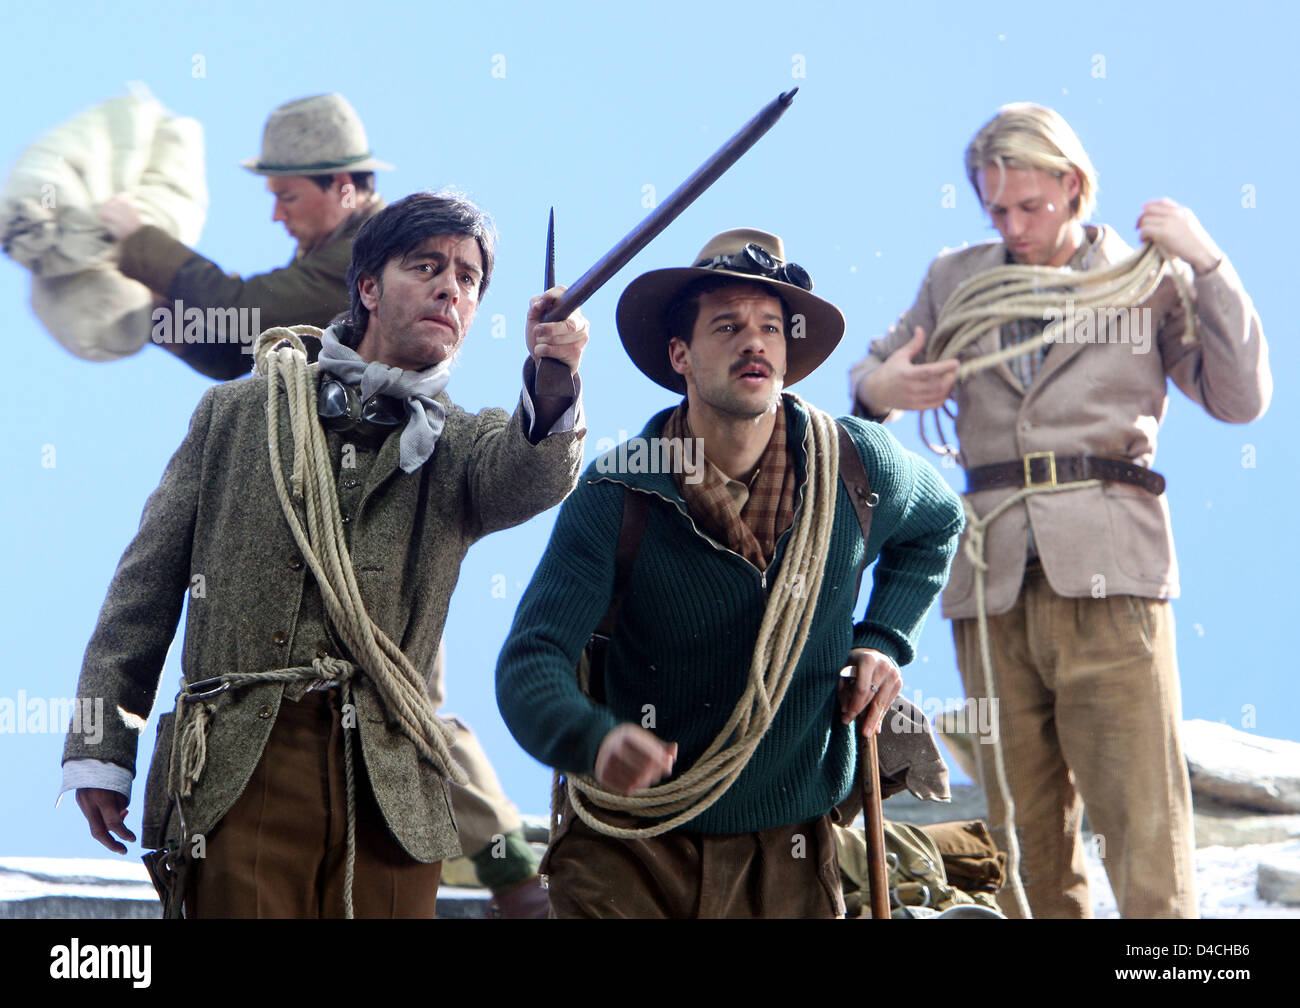 A handout photo made available by GES-Sportfoto depicts the head coach of Germany's national soccer team, Joachim Loew (front L), goalkeeper Timo Hildebrand (R) and player Piotr Trochowski (L) performing in historical mountain climbing clothes during the shooting of an Mercedes Benz commercial in Gross-Gerau, Germany, 04 February 2008. Photo: MARKUS GILLIAR Stock Photo